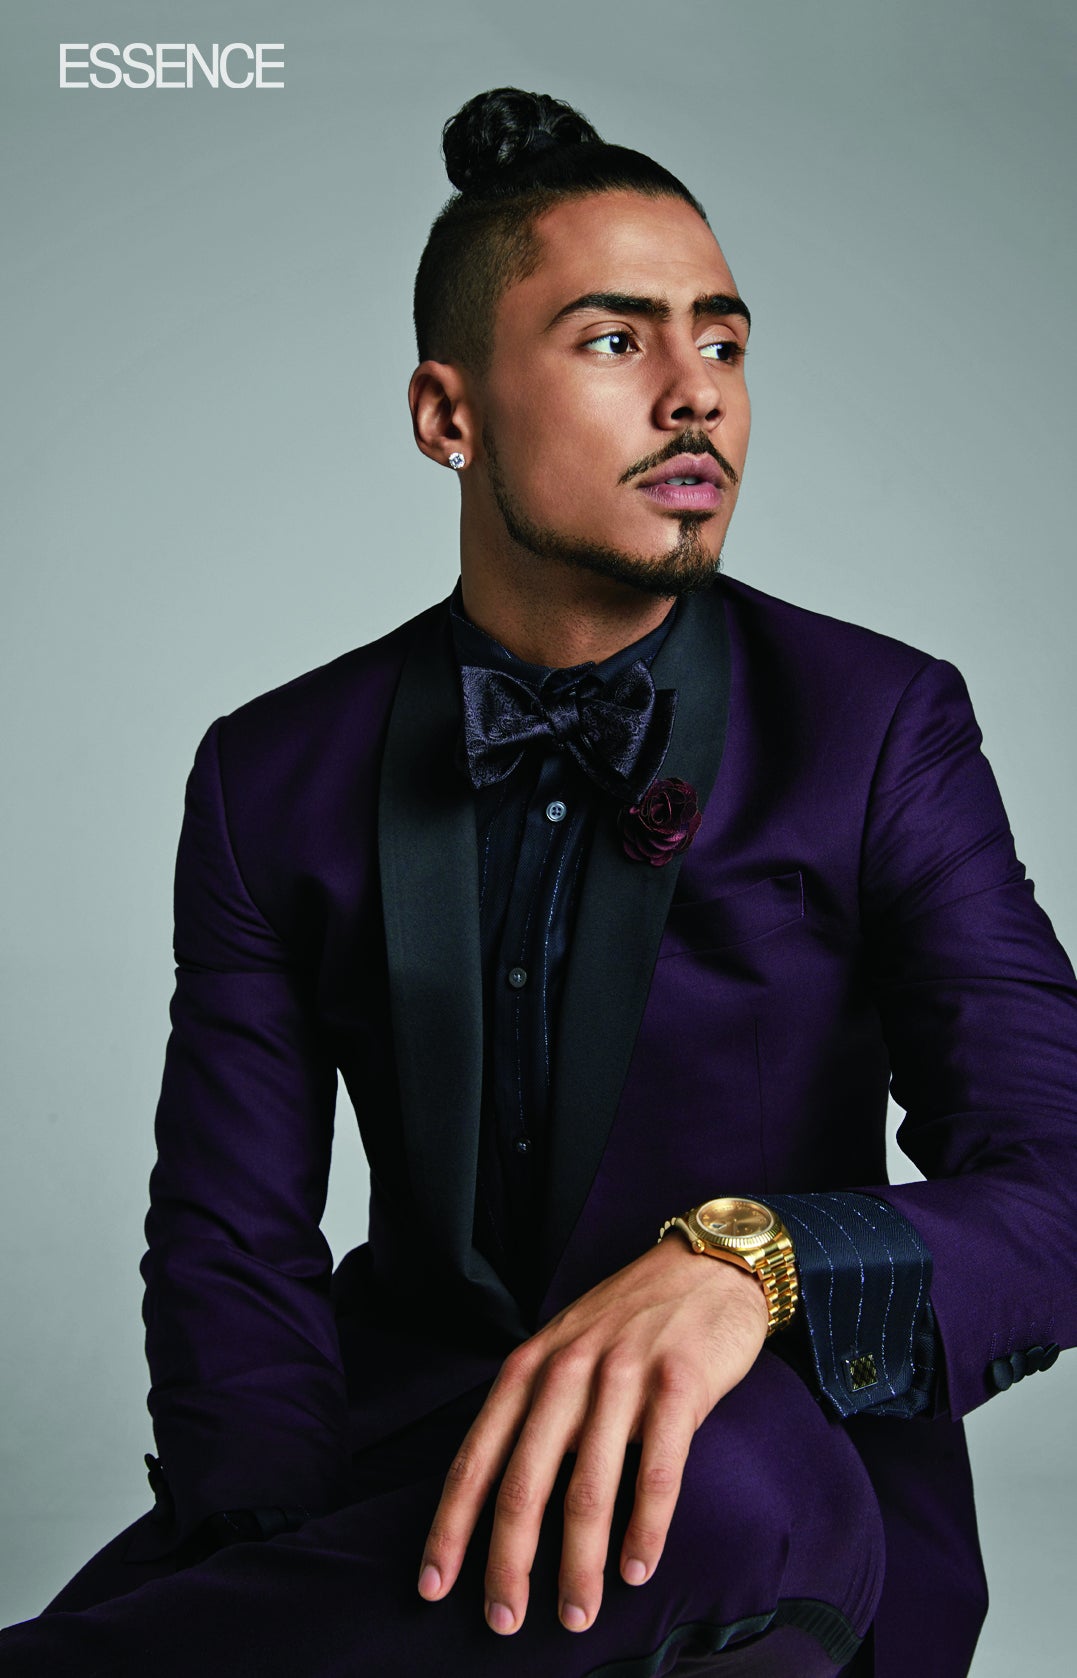 EXCLUSIVE: Quincy Brown Talks New Film, Music And Rocking Fly Holiday Suiting!